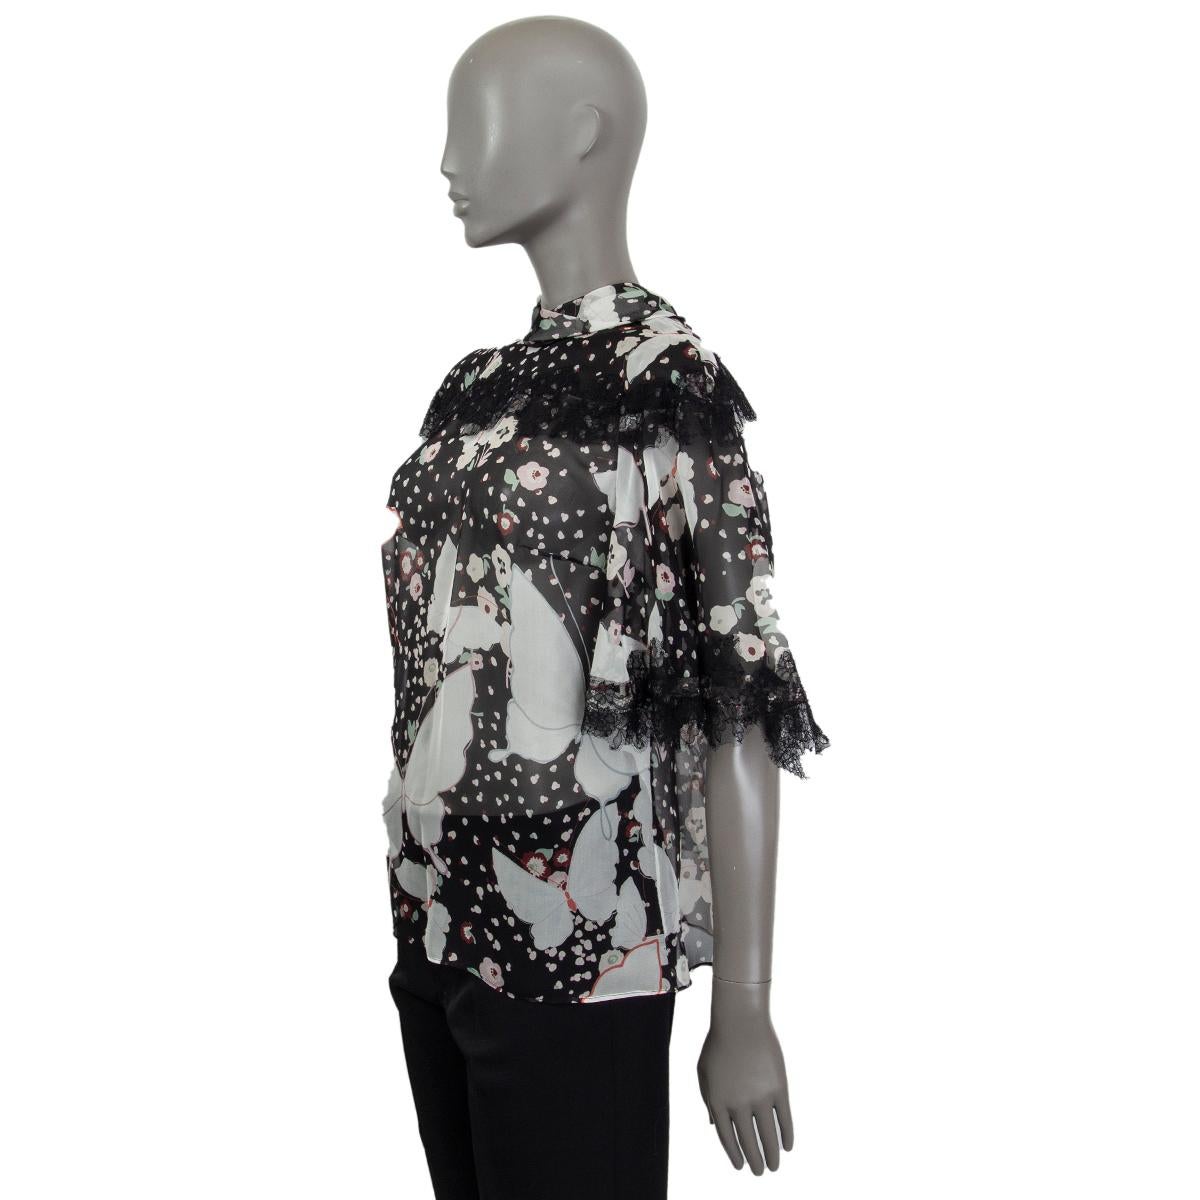 Valentino pop butterflies sheer blouse in black, off-white, burgundy, red, lilac and sage flower and butterfly printed silk featuring lace trimming. Keyhole and bow on the back. Has been worn and is in excellent condition. 

Tag Size 42
Size